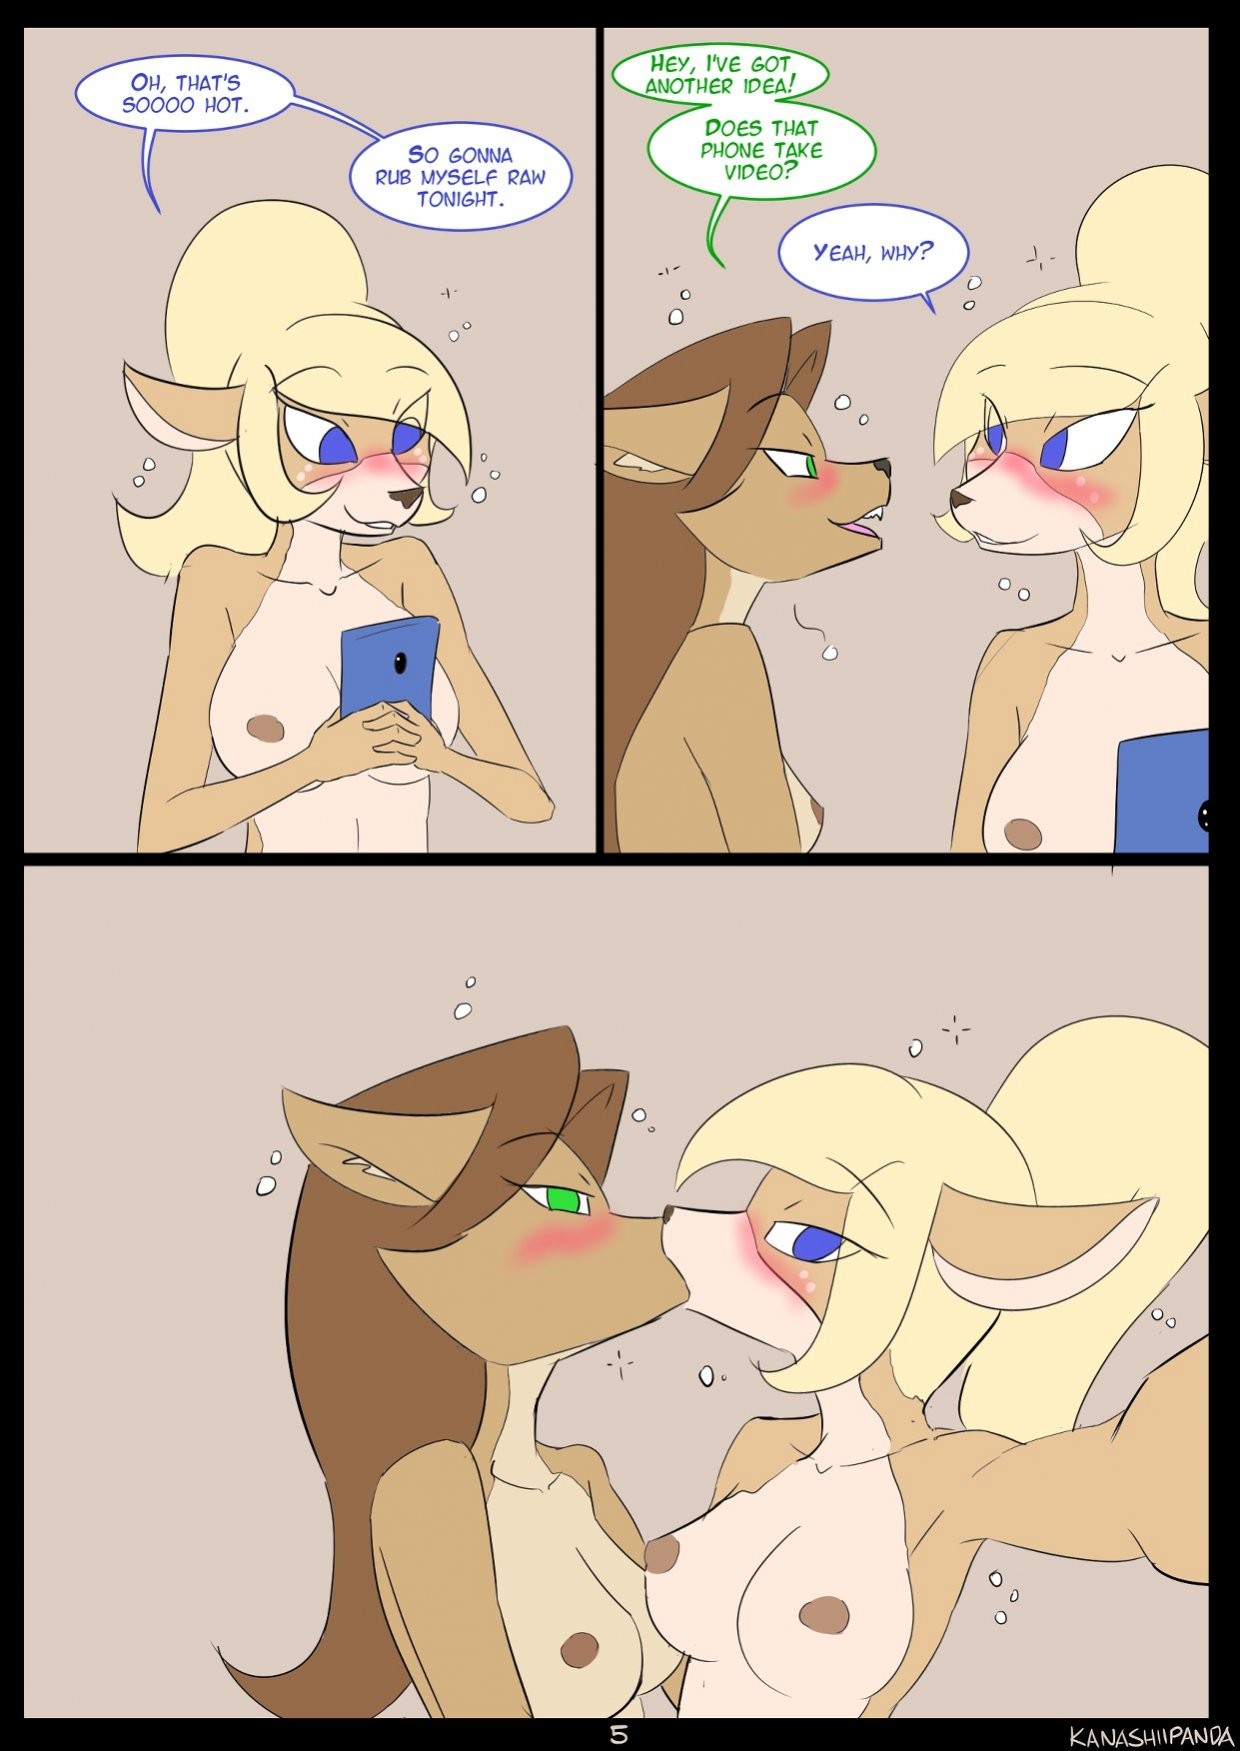 Book of Lust - Selfies porn comic picture 5